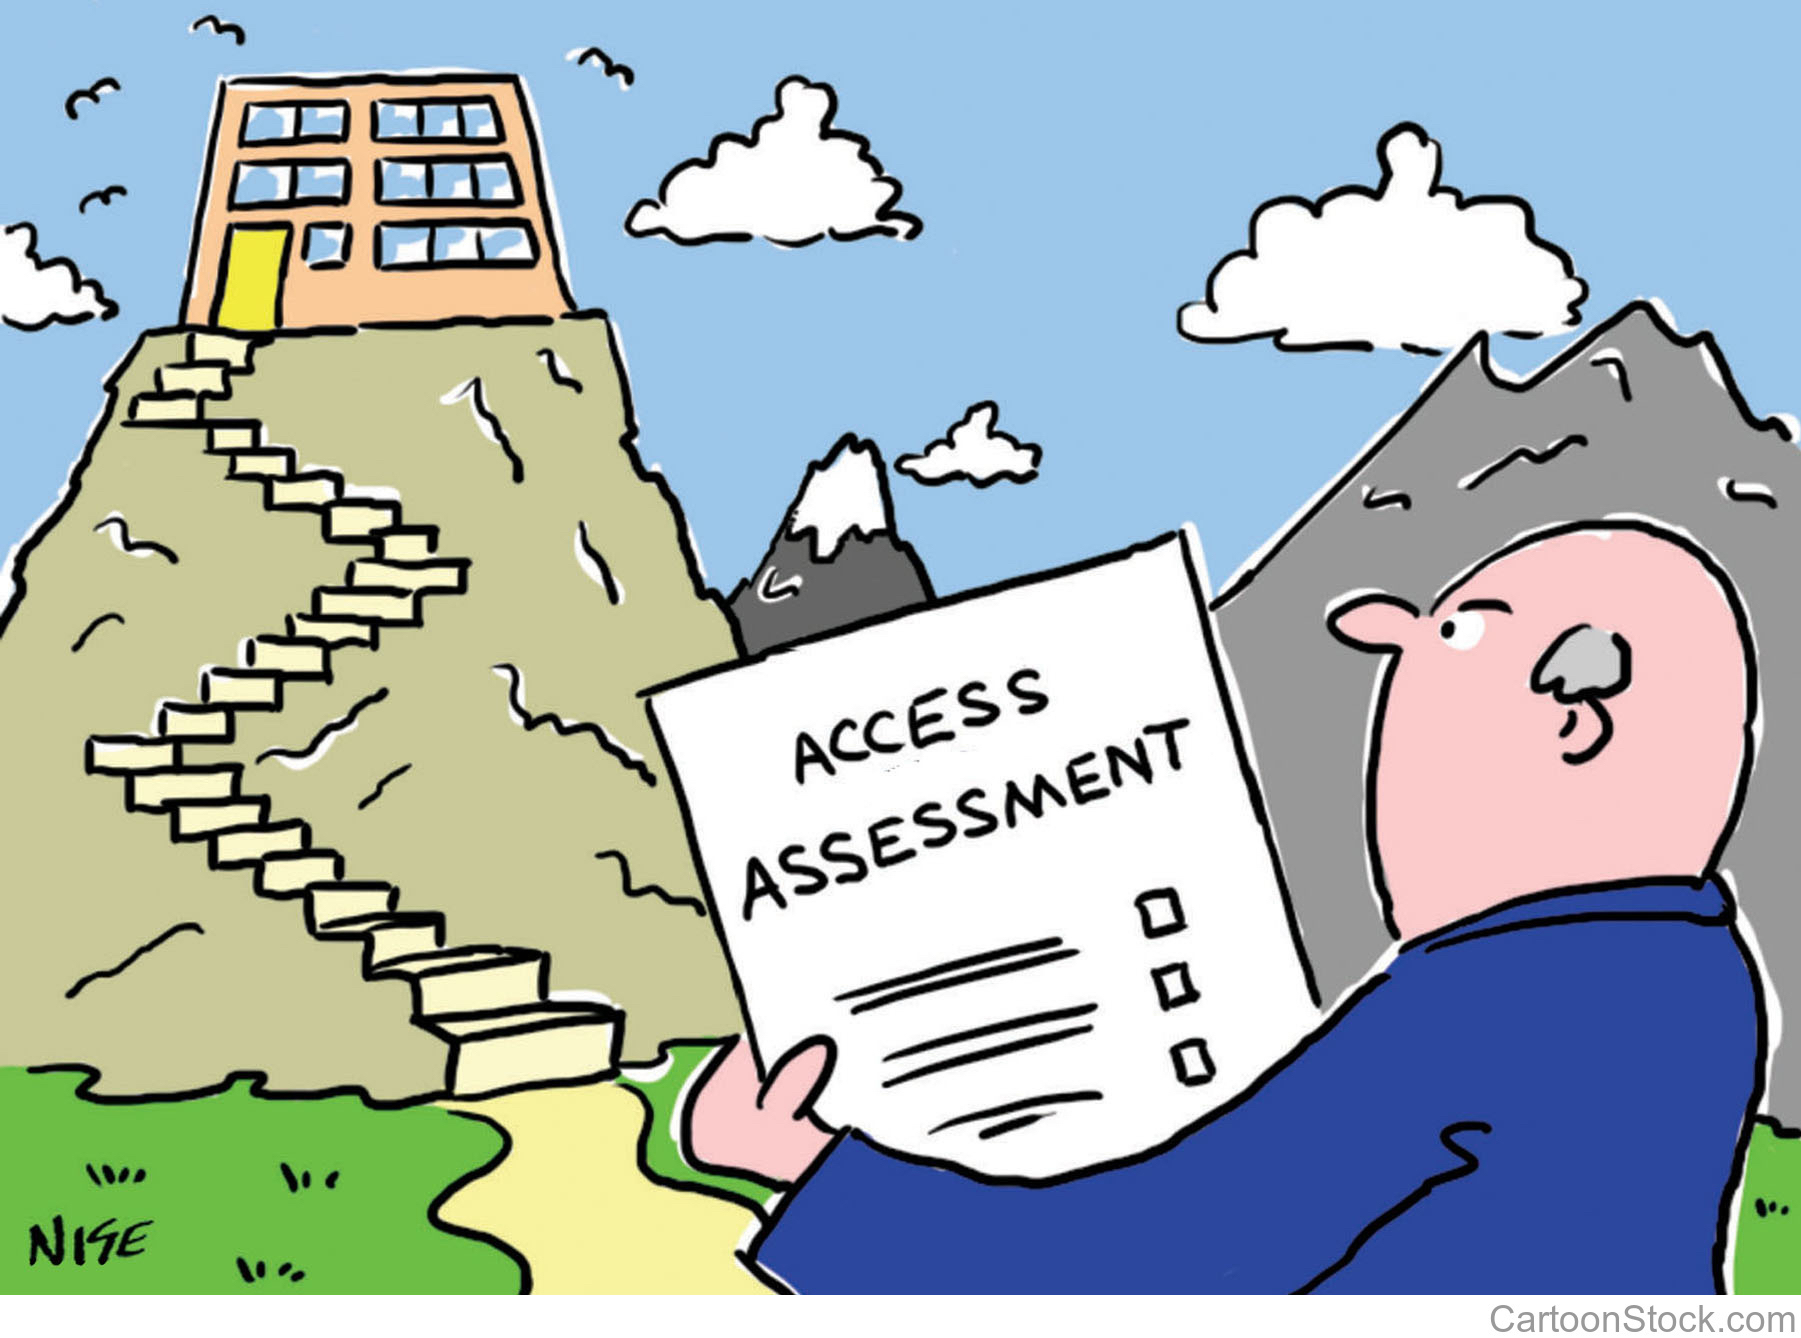 Cartoon of man surveying designs for an accessible building built at the top of a mountain.